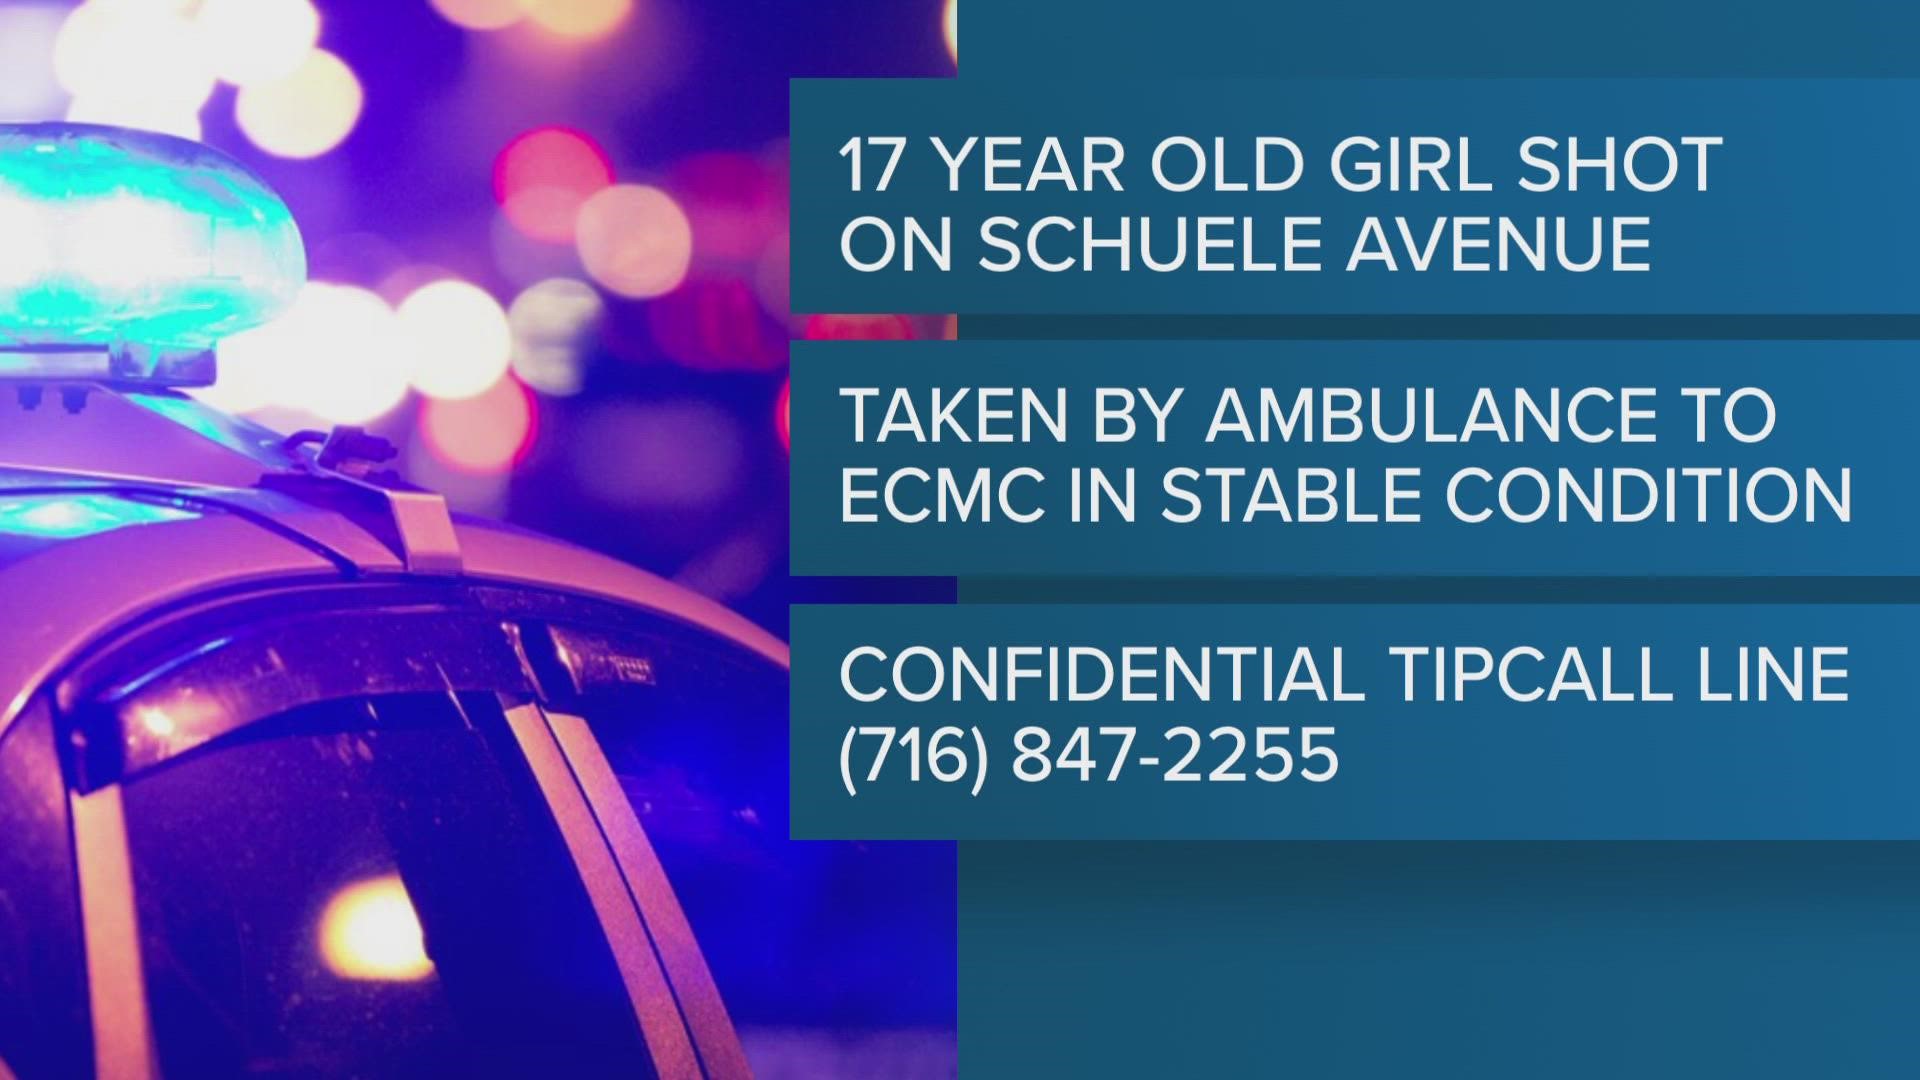 A police spokesperson said the girl was shot while outside. She was taken by ambulance to Erie County Medical Center to be treated.